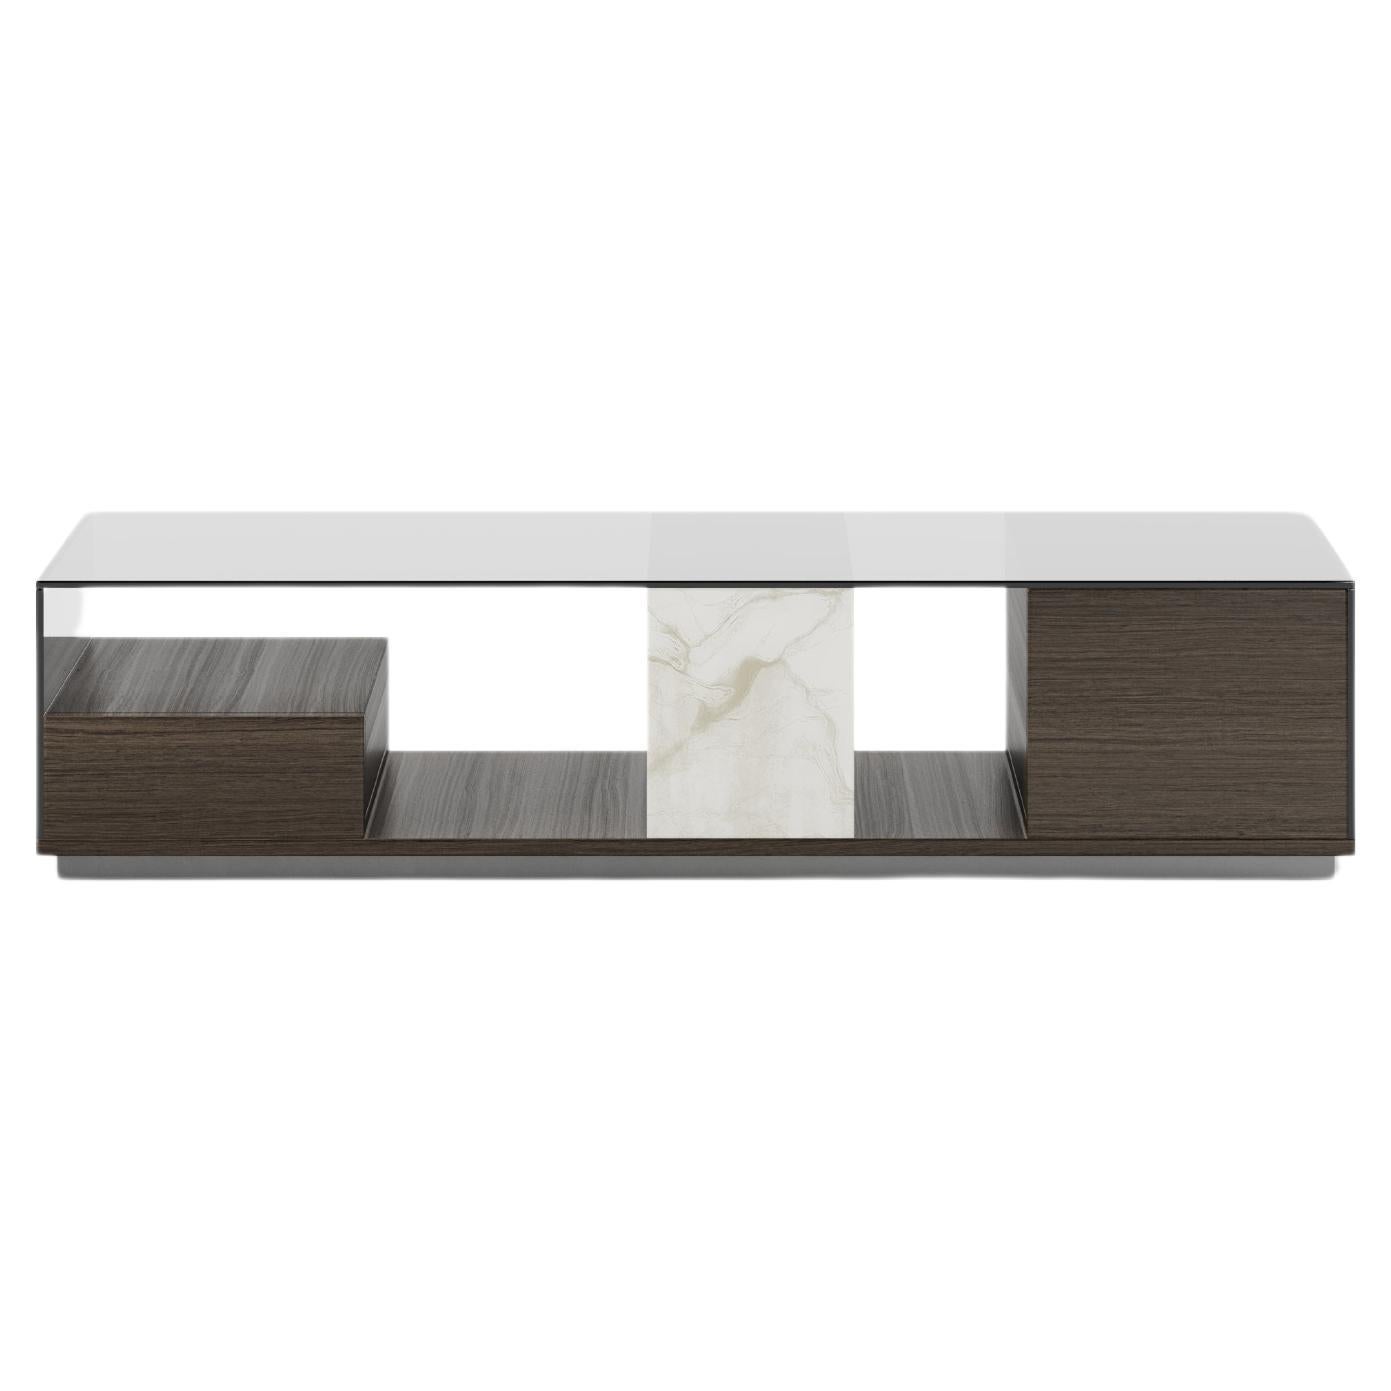 Ryan decorative coffee table, wood frame, smoked glass, marble, metal For Sale